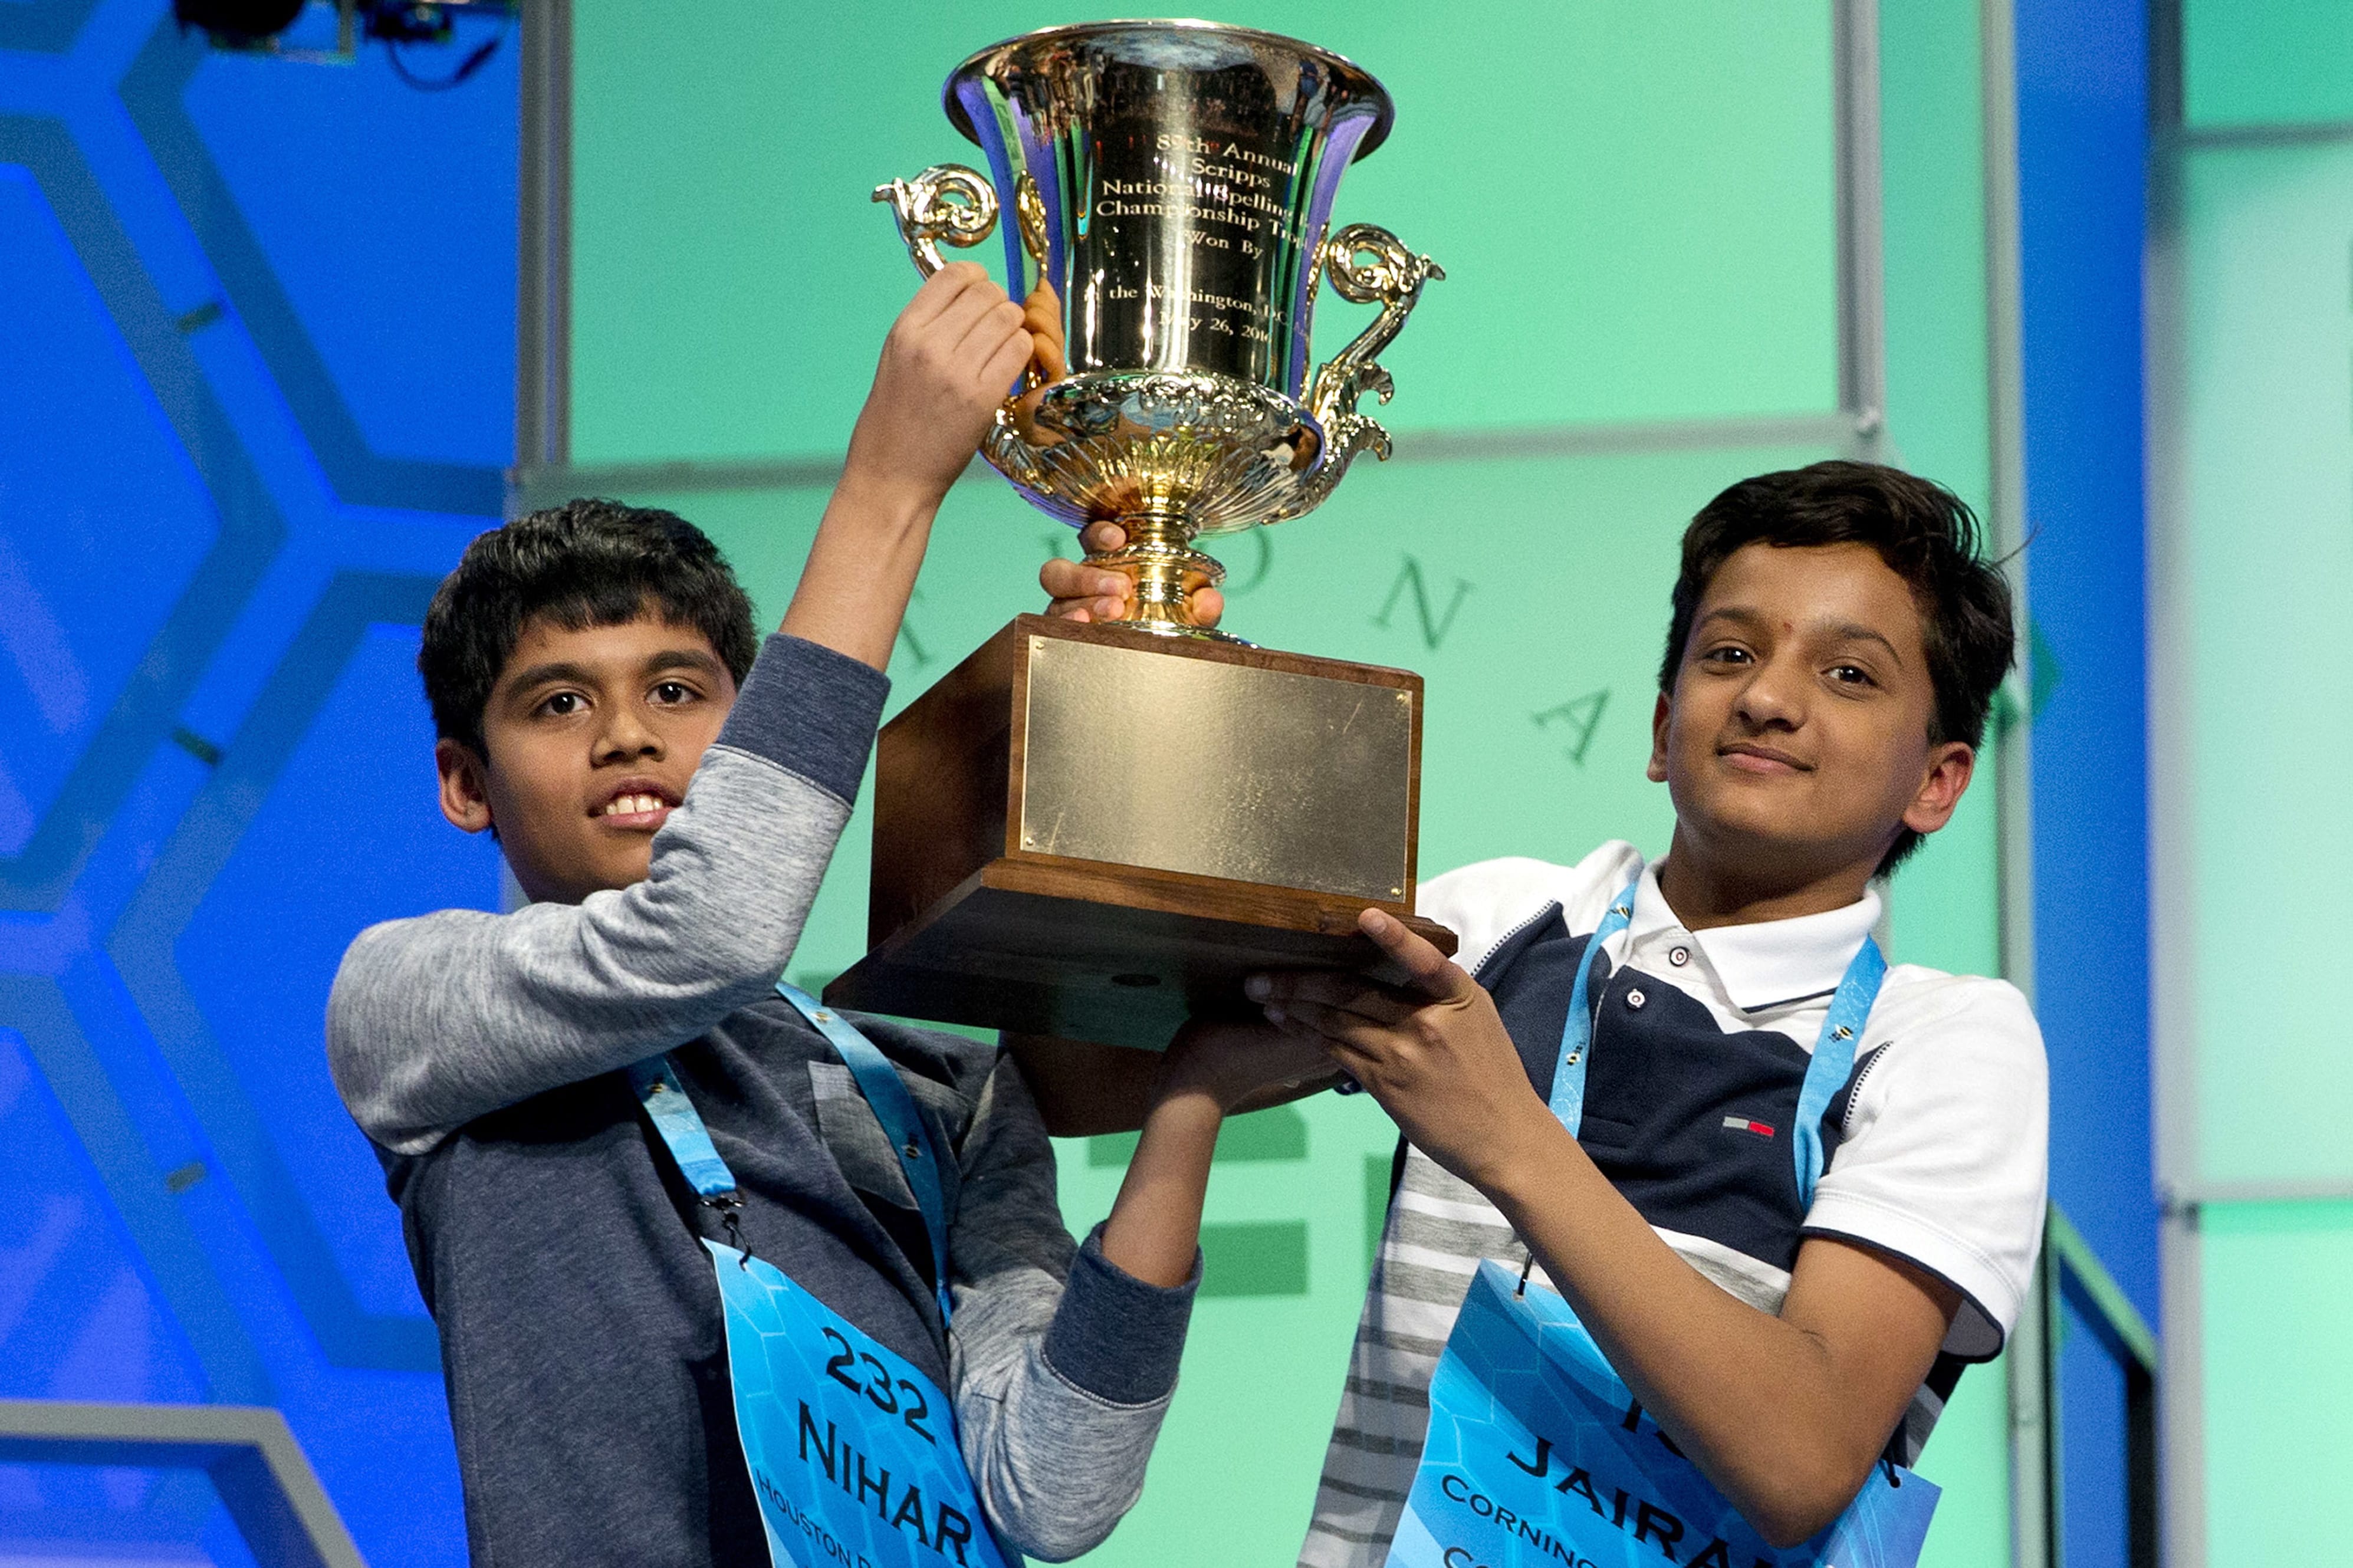 Nihar Janga, 11, of Austin, Texas, left, and Jairam Hathwar, 13, of Painted Post, N.Y., hold up the trophy after being named co-champions at the 2016 National Spelling Bee on Thursday in National Harbor, Md.